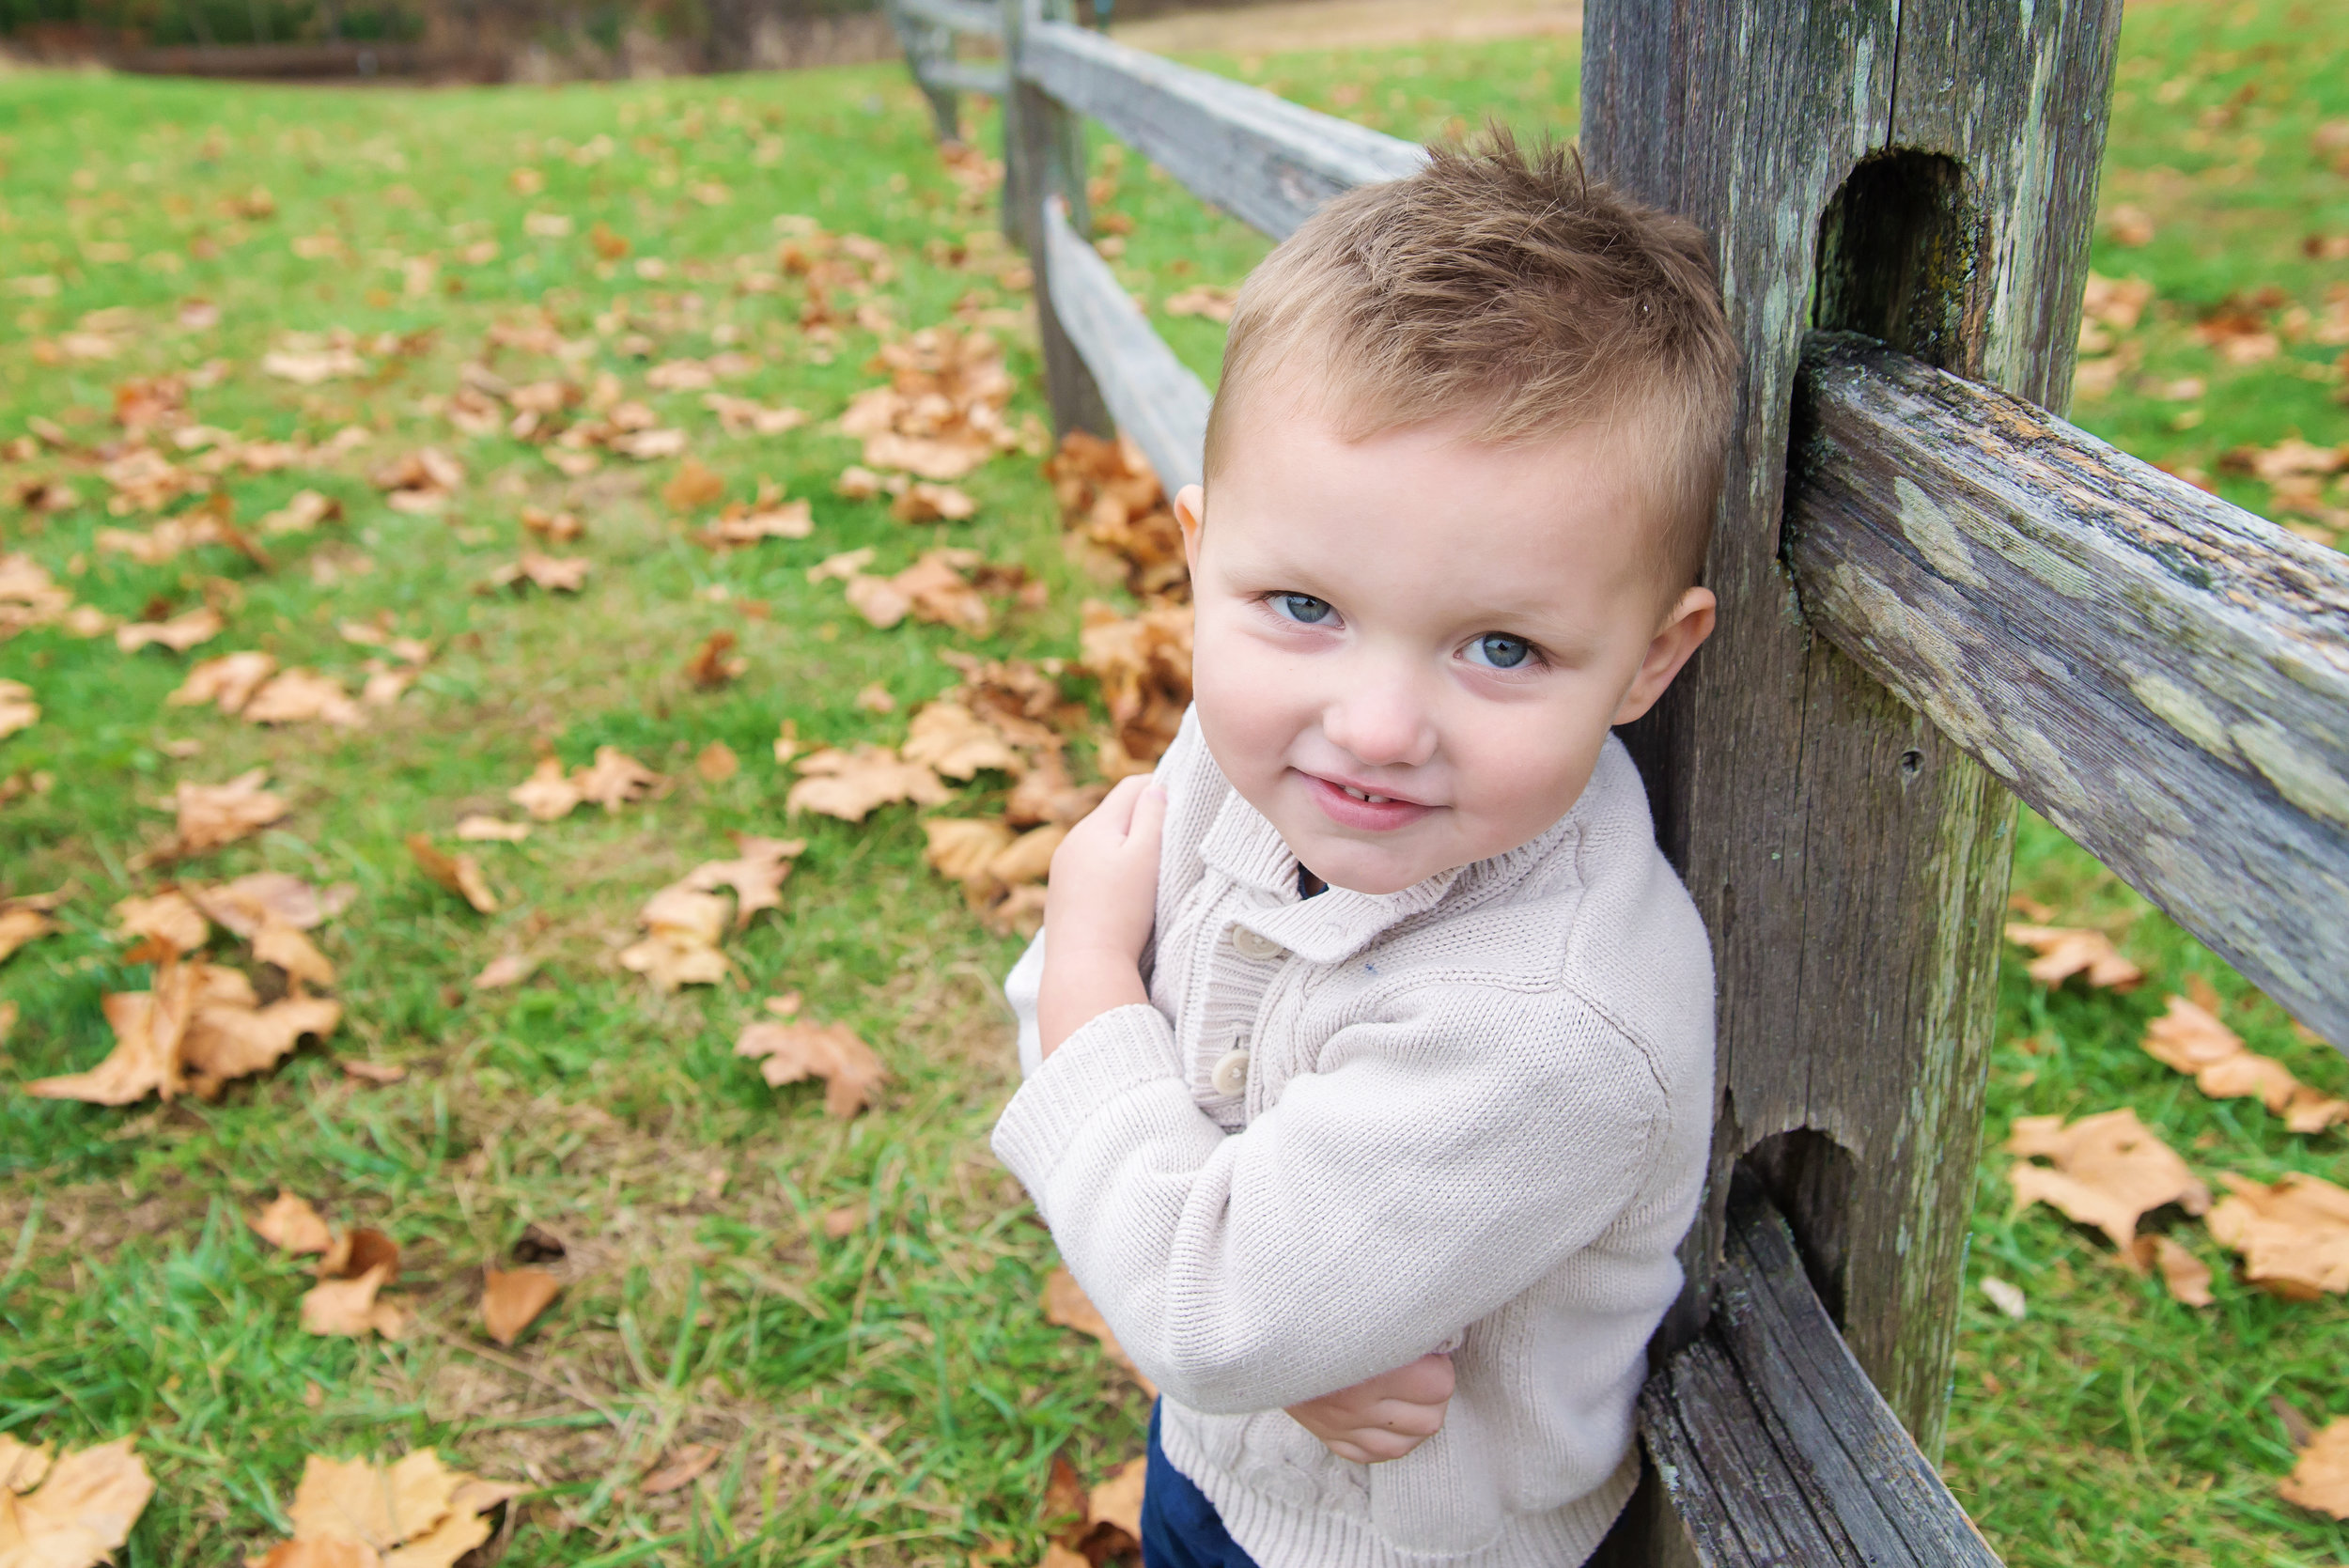 st-louis-fall-mini-sessions-2018-family-photographer-preschool-boy-arm-folded-leaning-on-wooden-fence.jpg